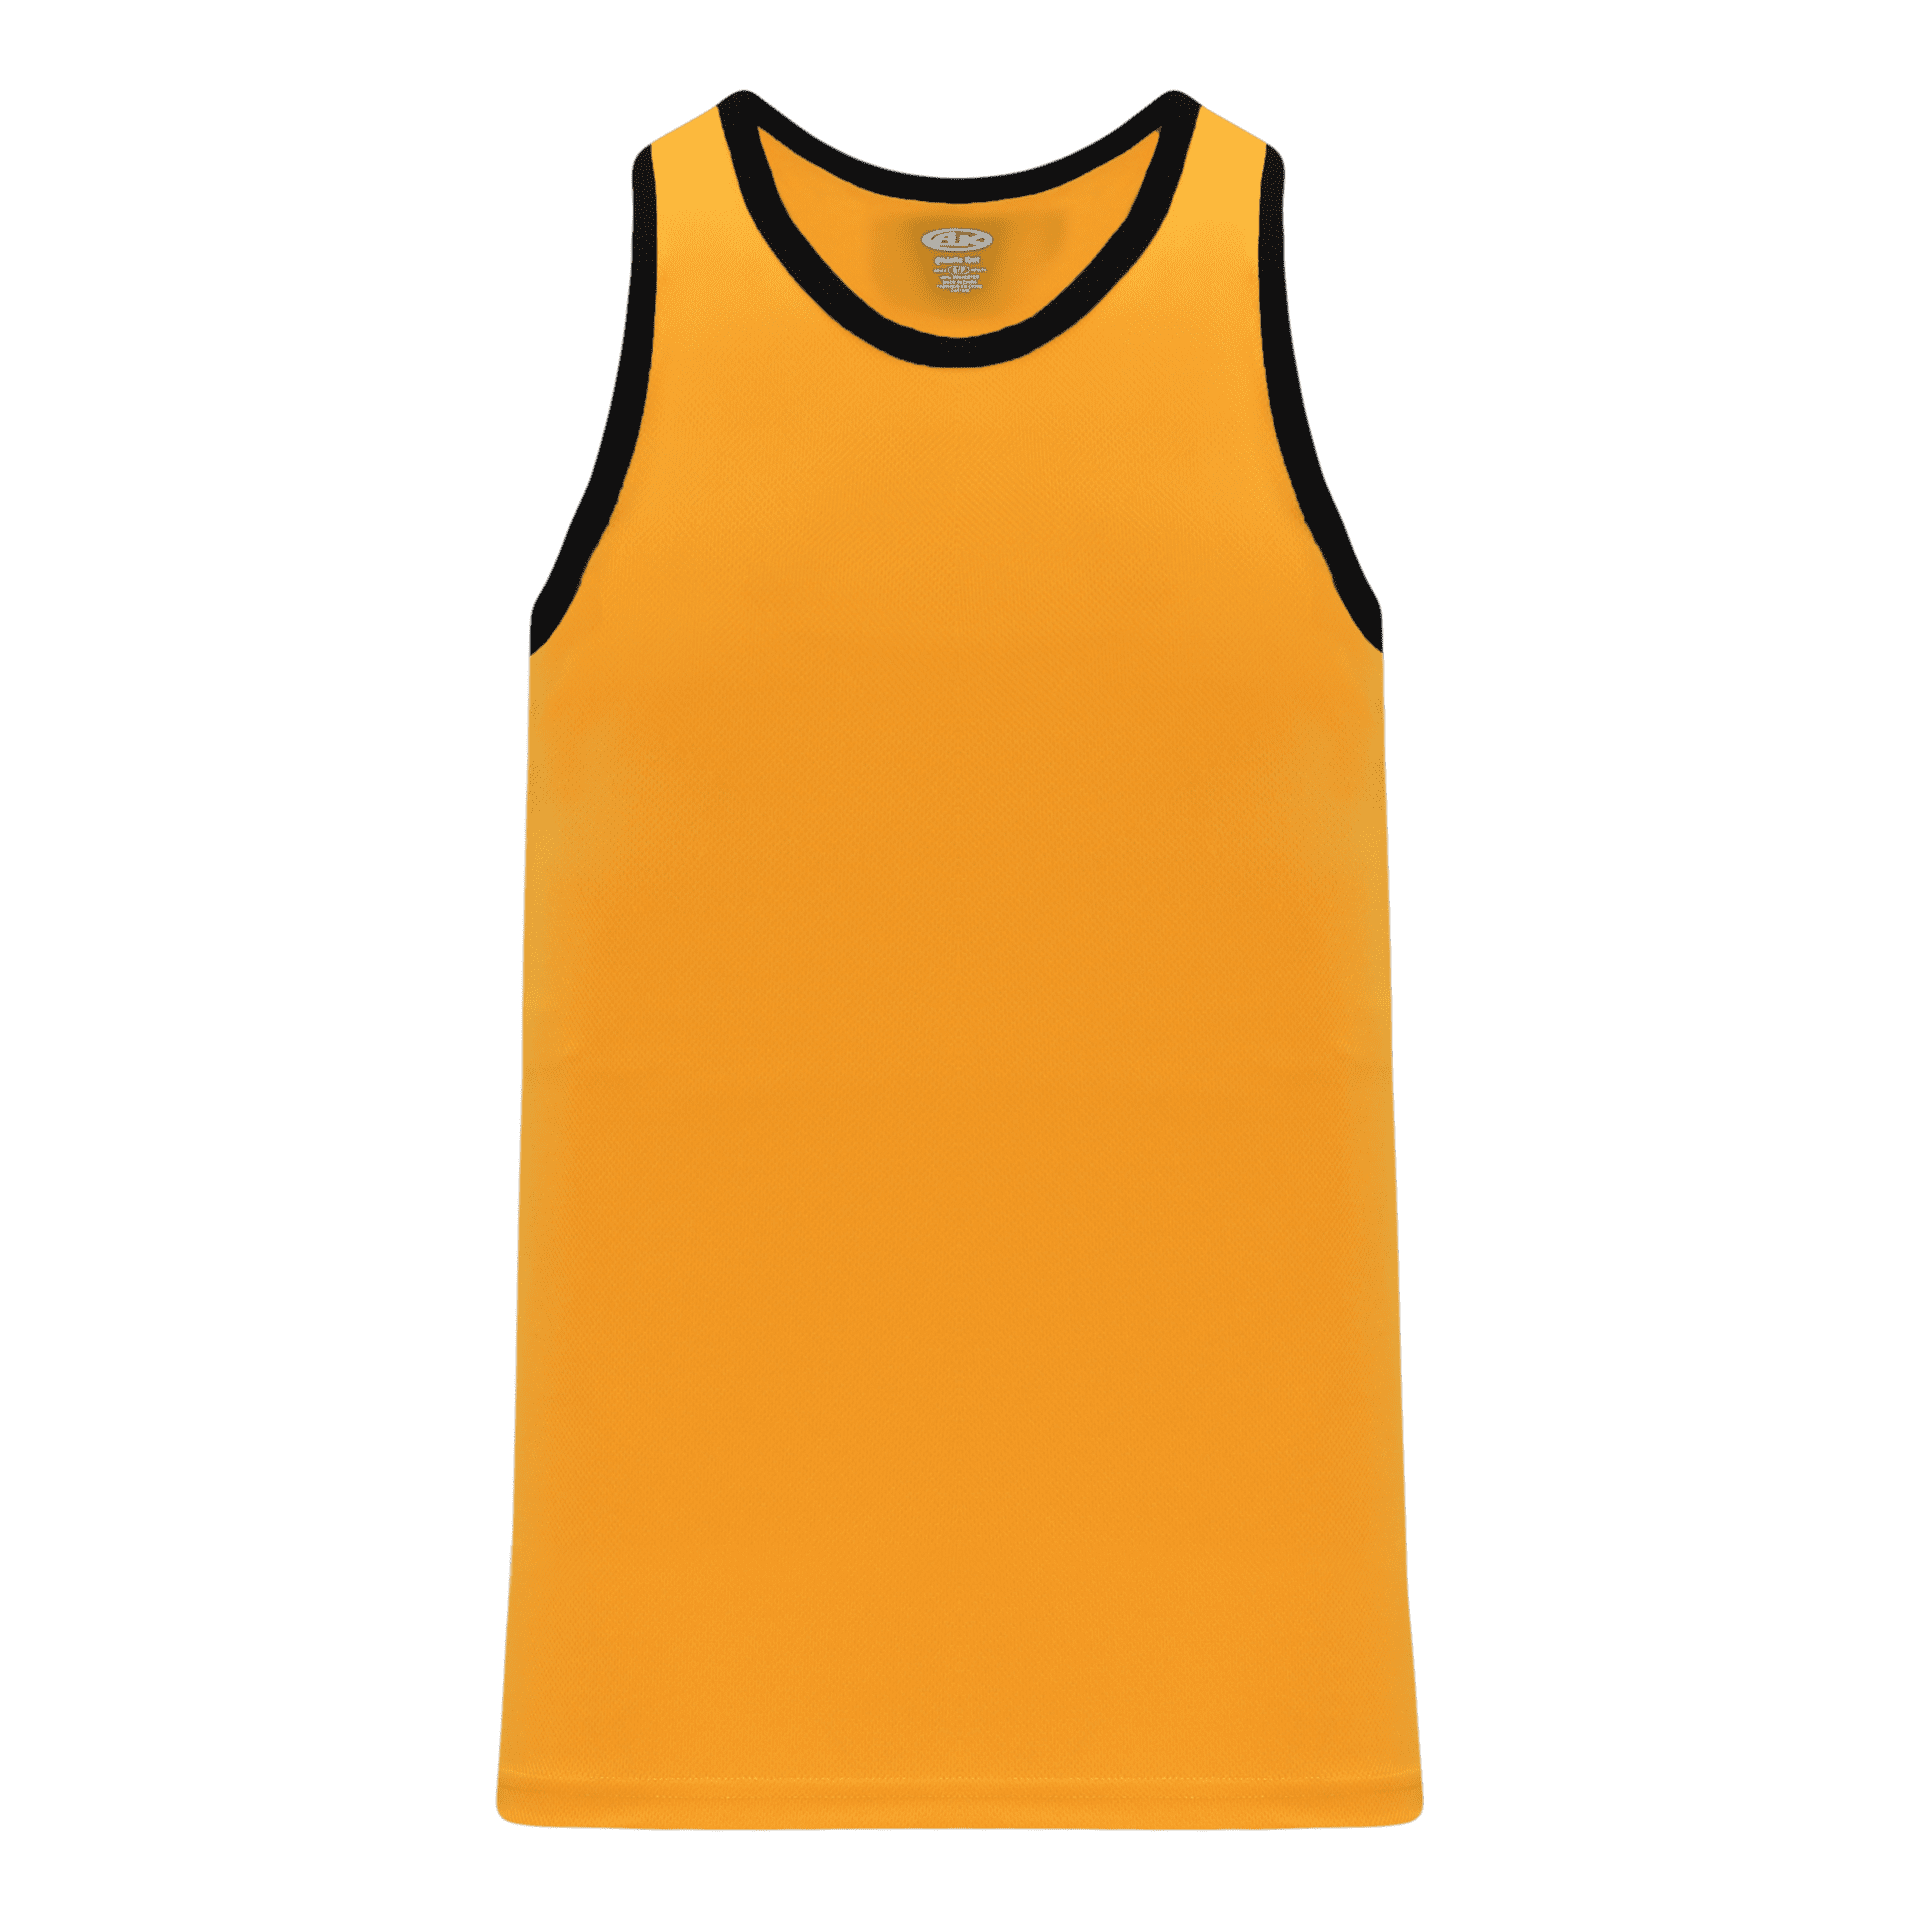 ATHLETIC KNIT LEAGUE BASKETBALL JERSEY #B1325 Gold / Black